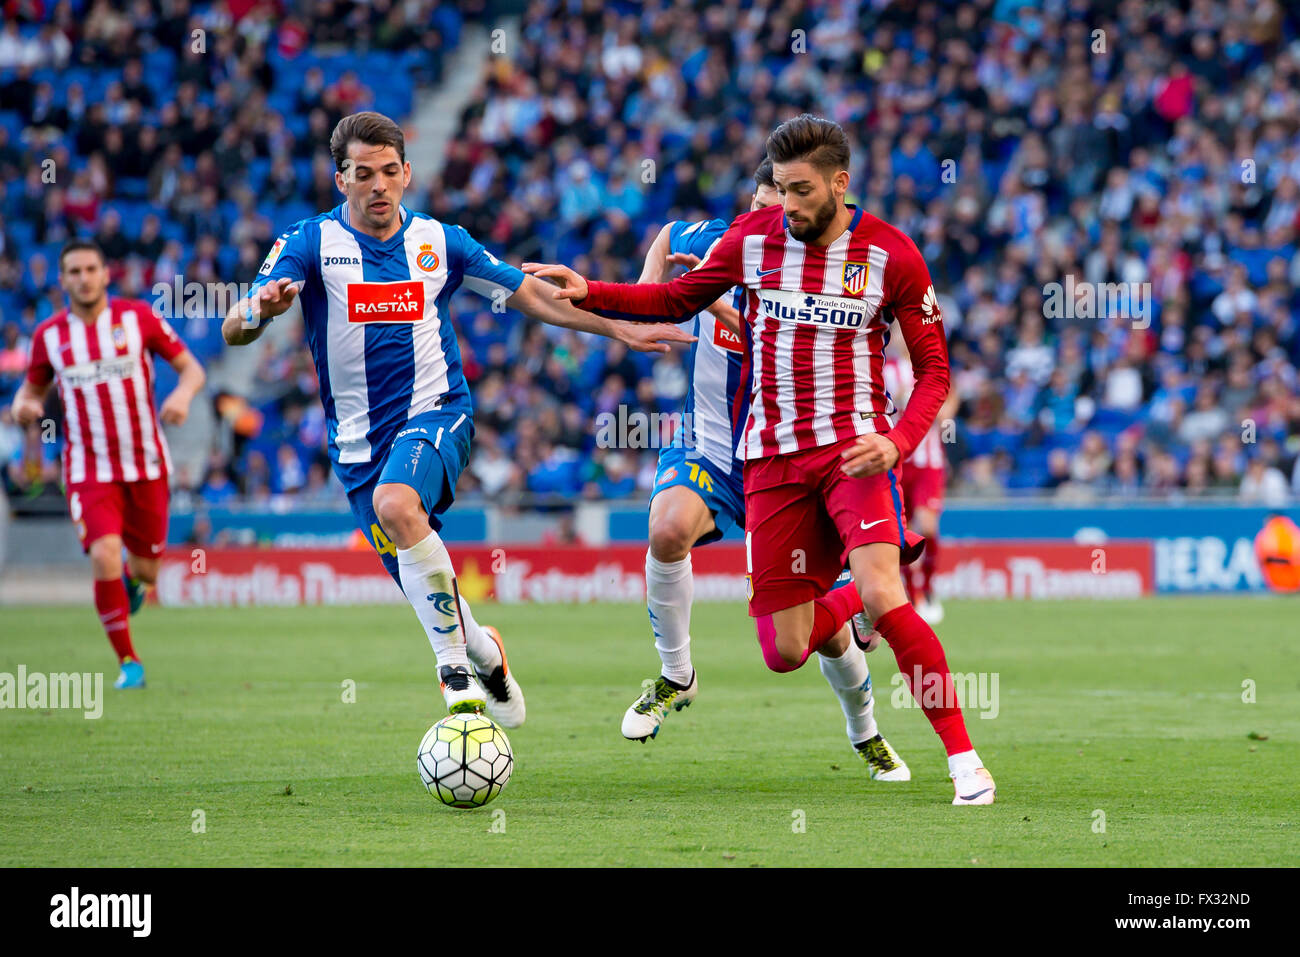 Barcelona, Spain. 9th April, 2016. Yannick Ferreira Carrasco plays at the La Liga match between RCD Espanyol and Atletico de Madrid at the Powerade Stadium on April 9, 2016 in Barcelonal, Spain. Credit:  Christian Bertrand/Alamy Live News Stock Photo